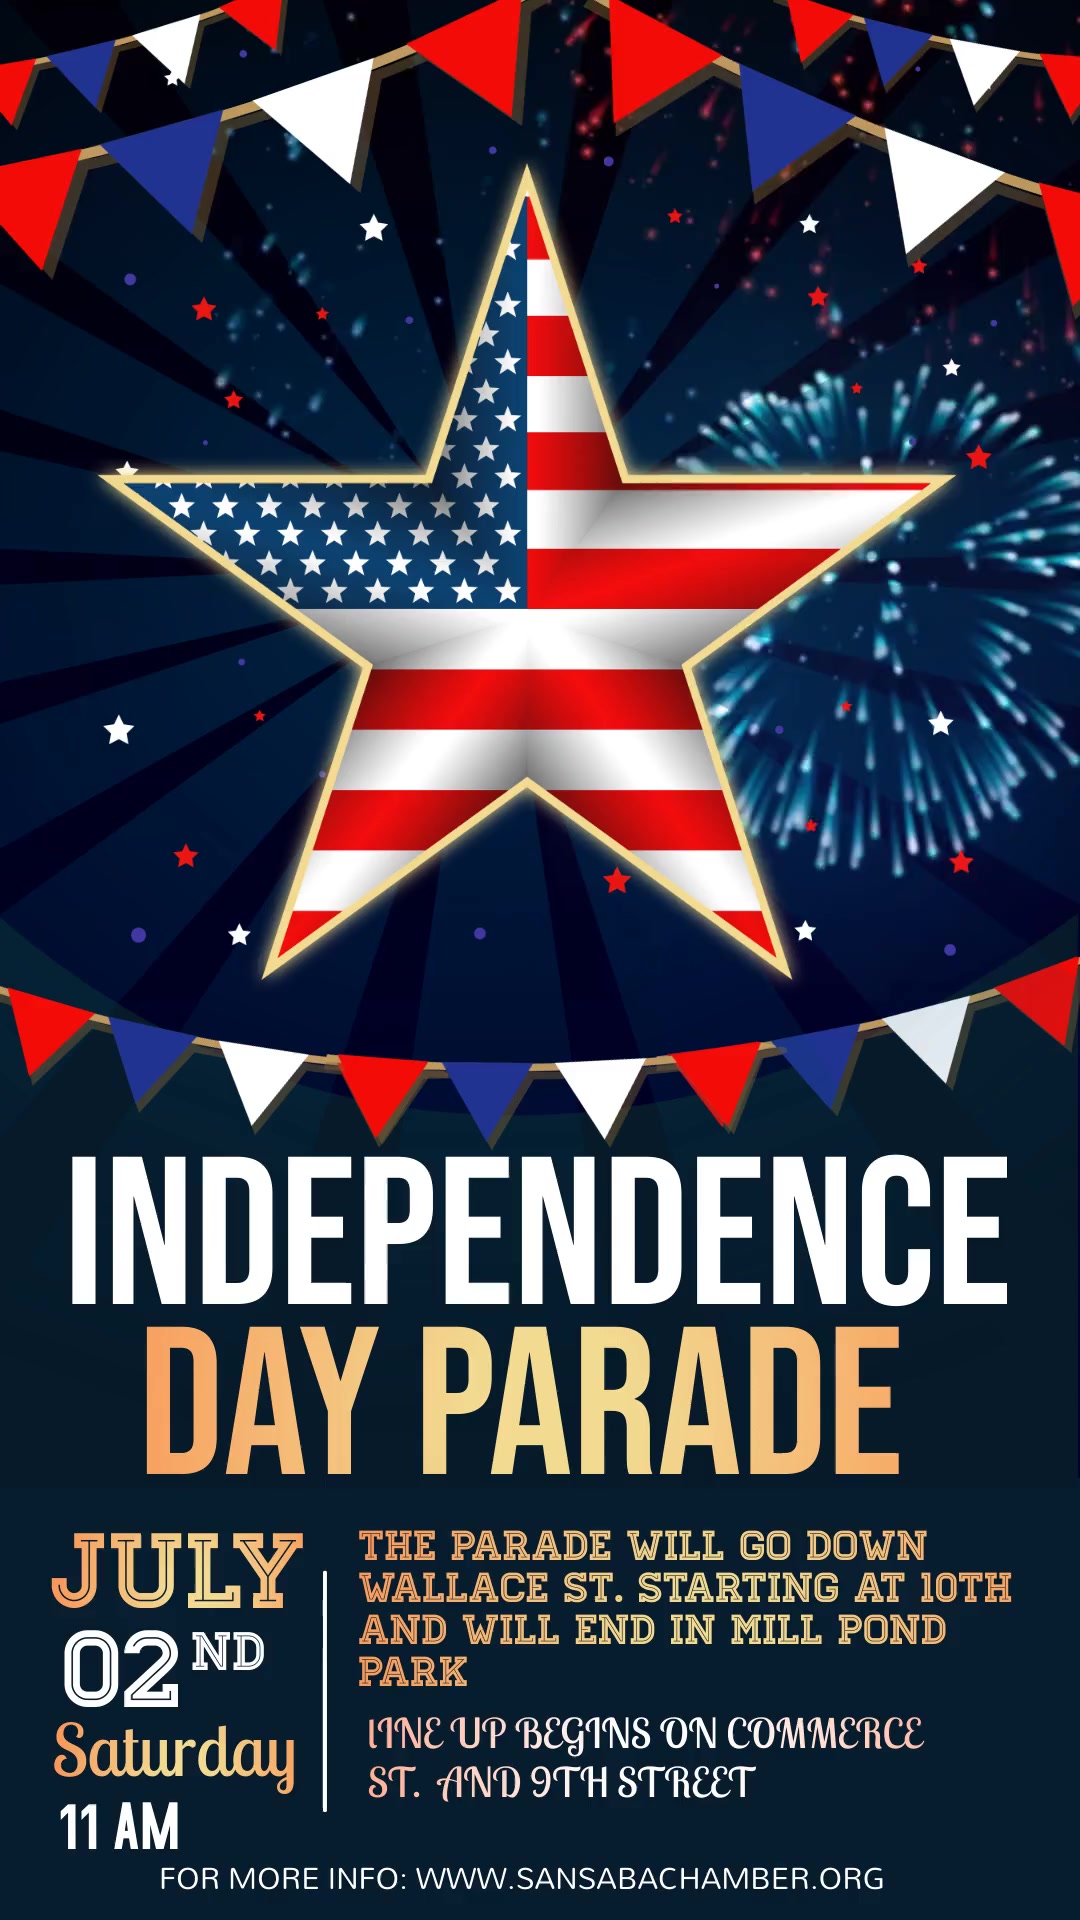 Independence Day Parade 07-02-22 11AM San Saba County Chamber of Commerce